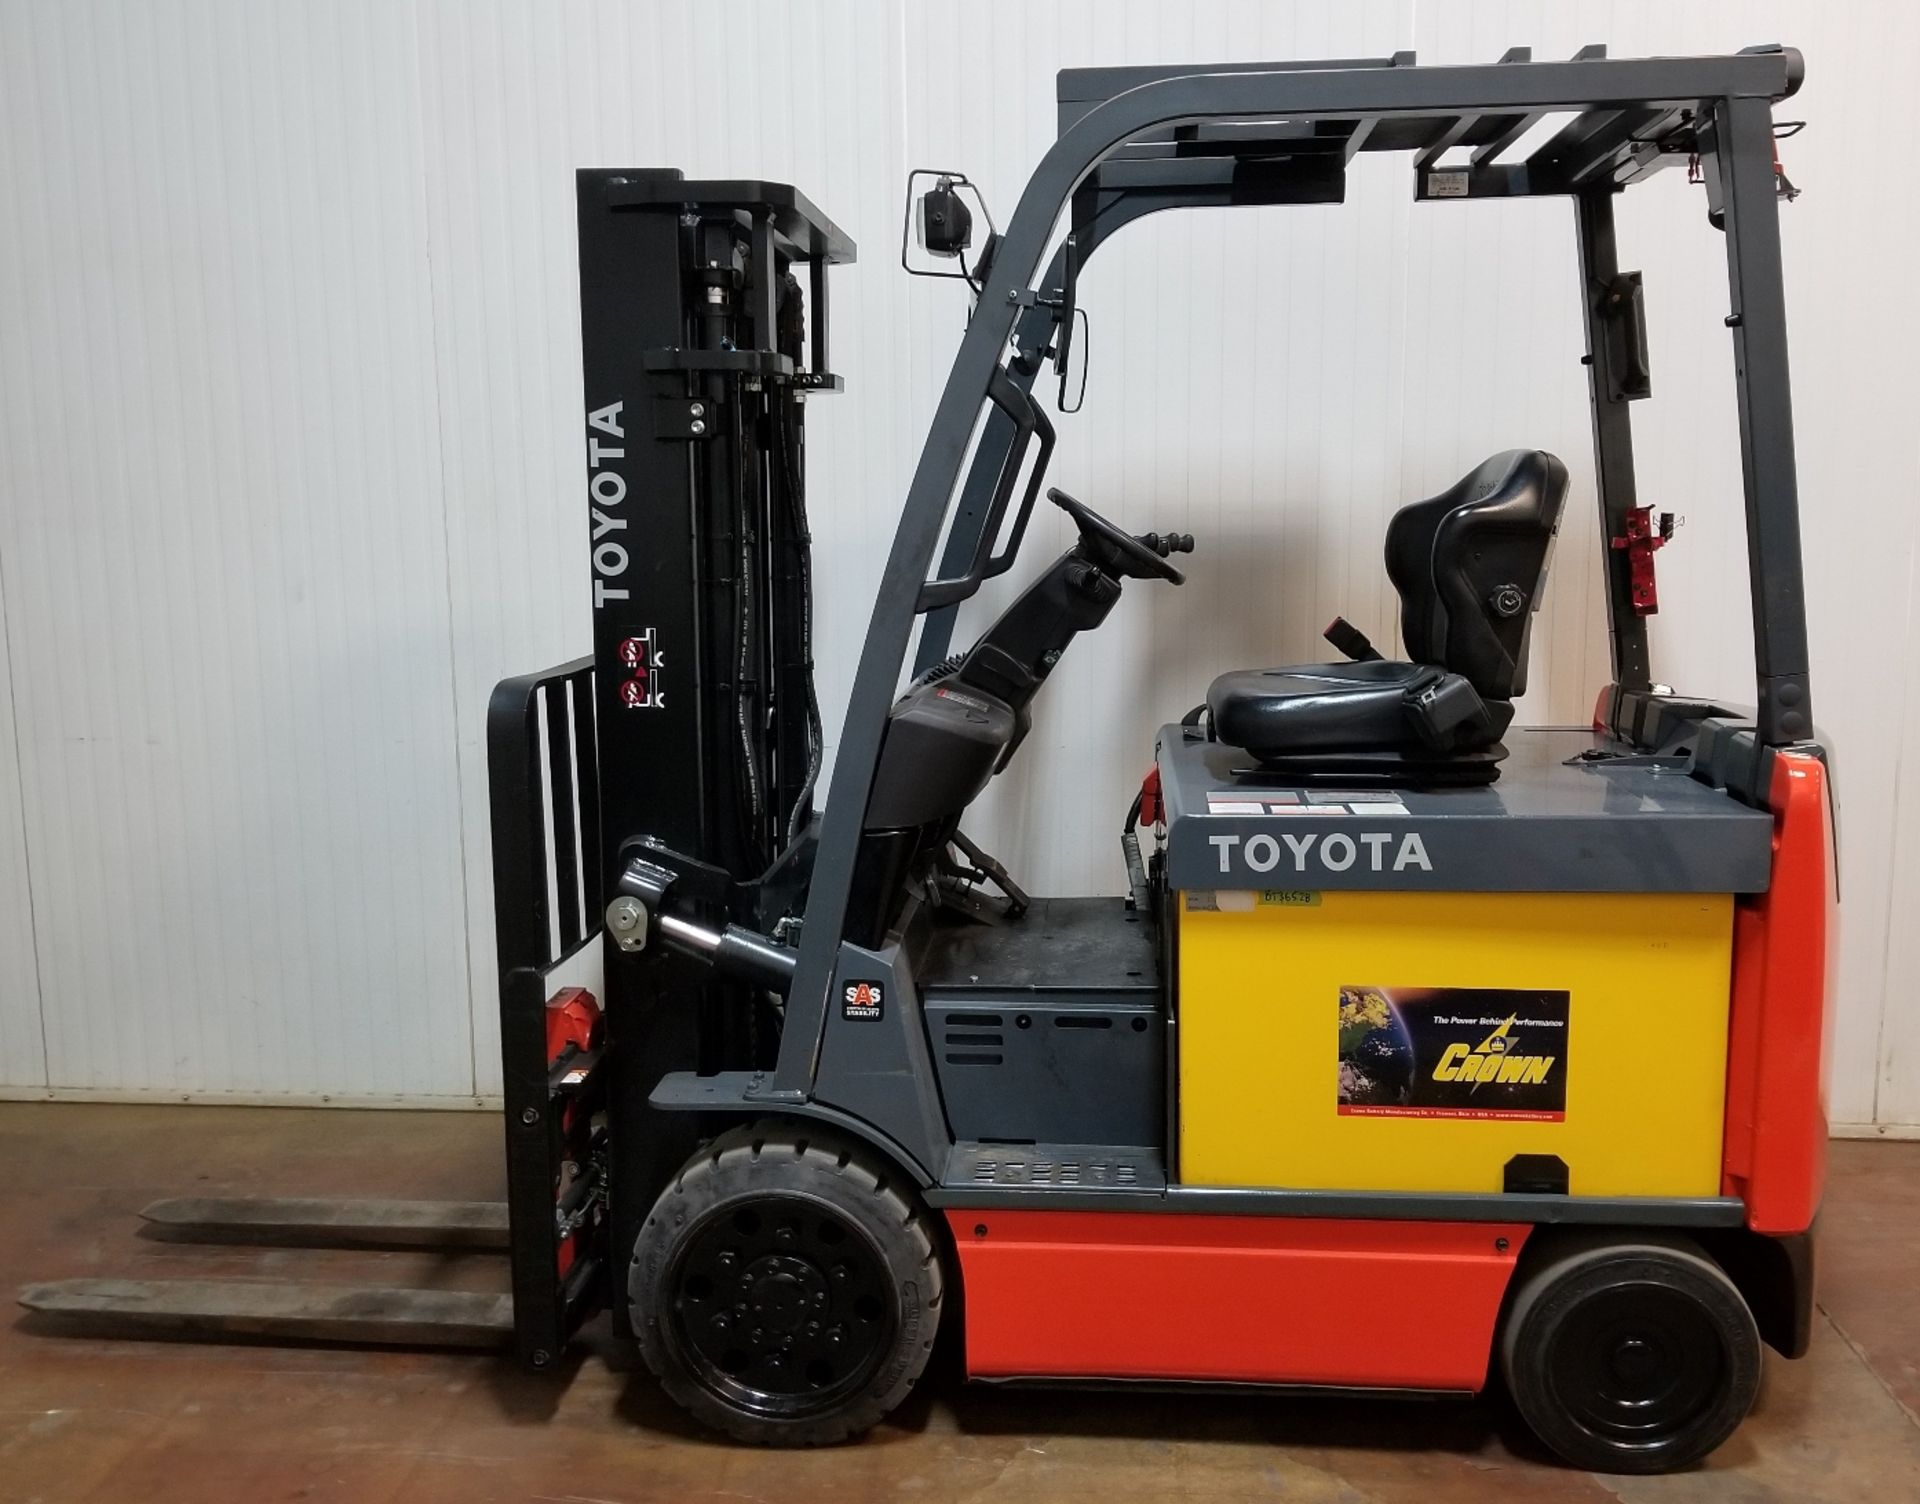 TOYOTA (2015) 8FBCU30 6,000 LB. 36V ELECTRIC FORKLIFT WITH 131" MAX. LIFT HEIGHT, SIDE SHIFT, - Image 2 of 3